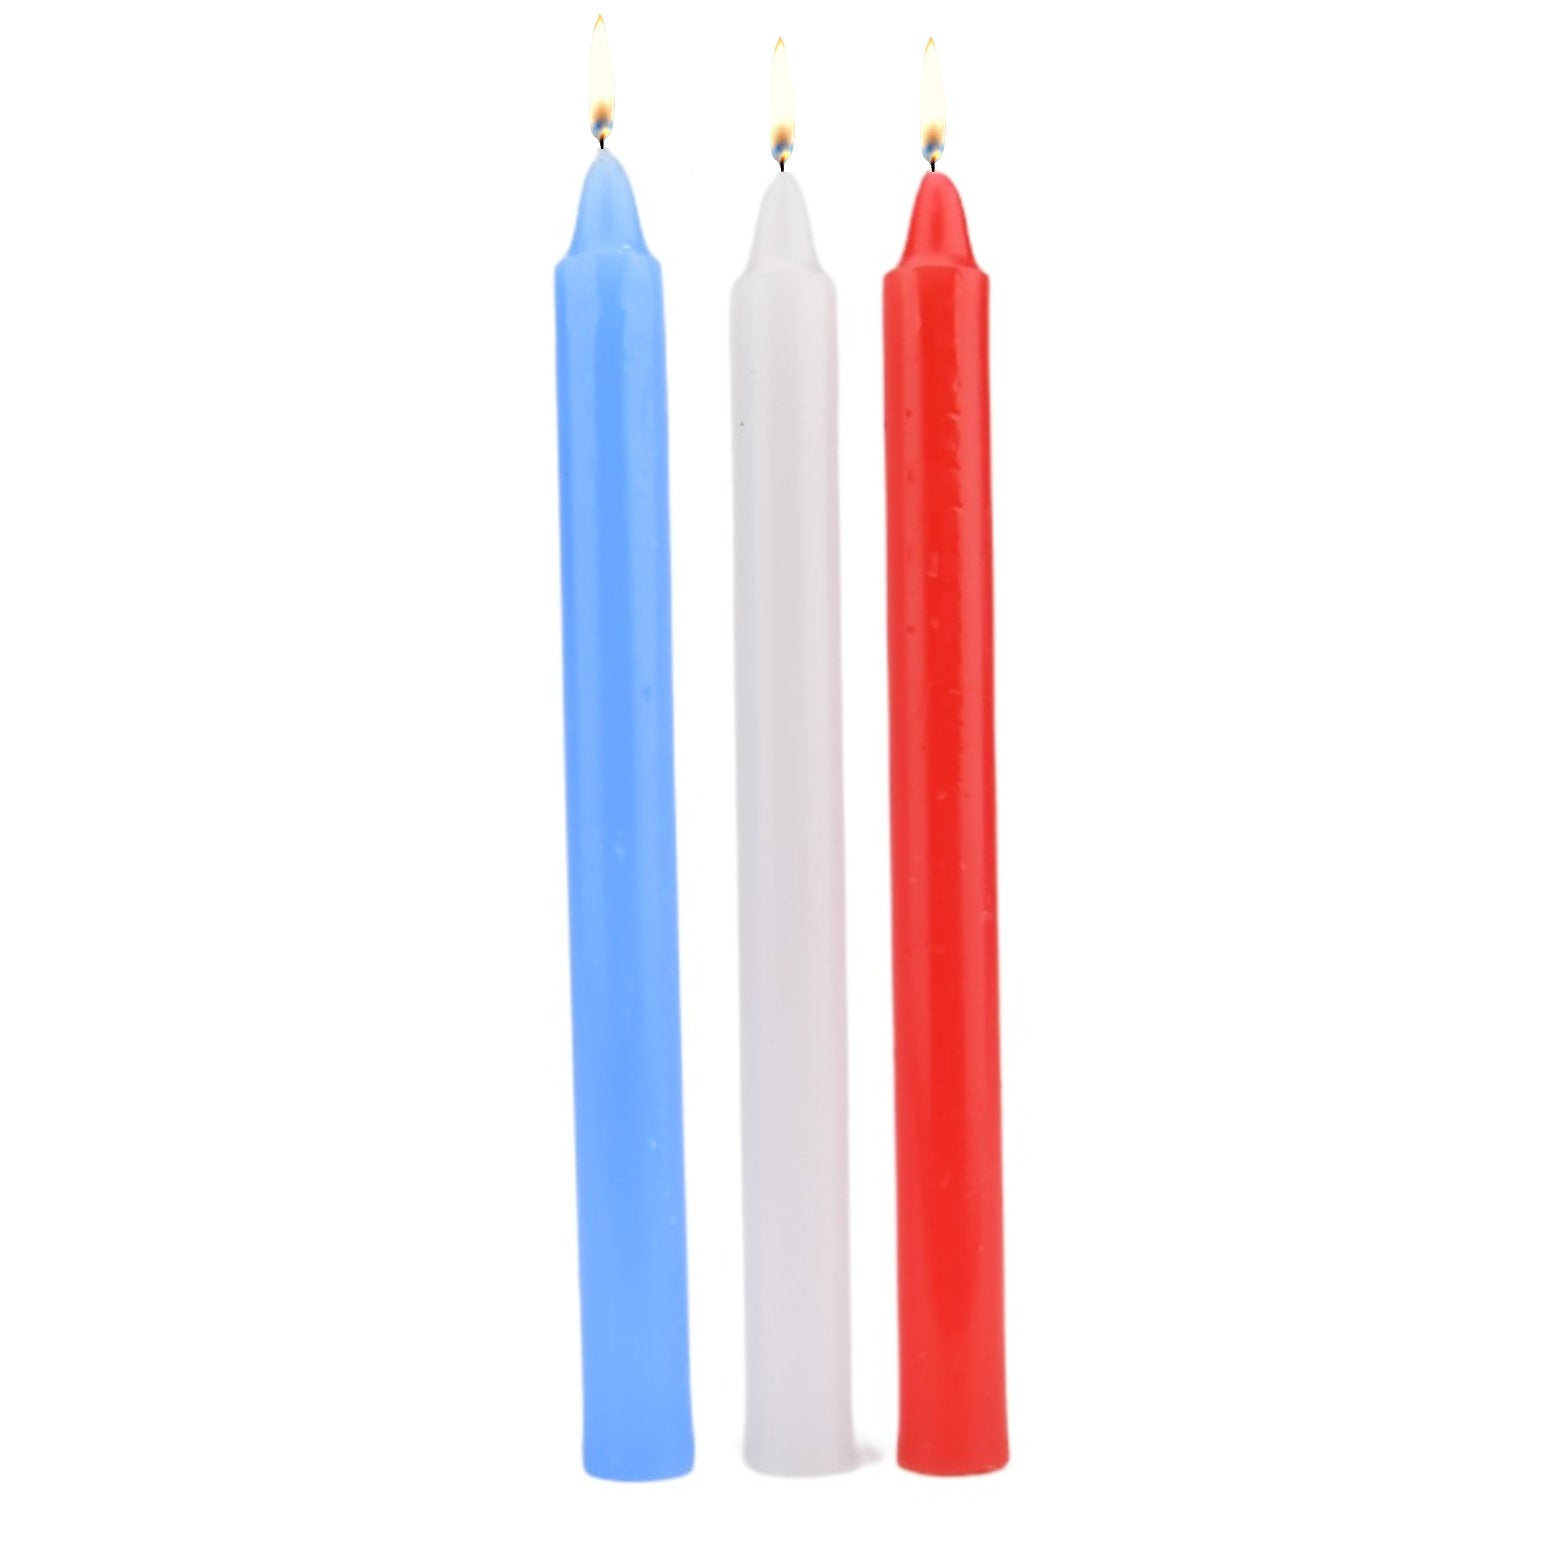 Bound to Play. Hot Wax Candles (3 Pack) - PL4YHOUSE - PL4YHOUSE - Bound to Play - Massage Oils and Candles - Bound to Play. Hot Wax Candles (3 Pack) - {{ sex }} - {{ adult_toys }} - {{ UK }} - {{ christmas }} - {{ anal sex toys }} - {{ bondage }} - {{ dildos }} - {{ essentials }} - {{ male sex toys }} - {{ lingerie }} - {{ vibrators }}